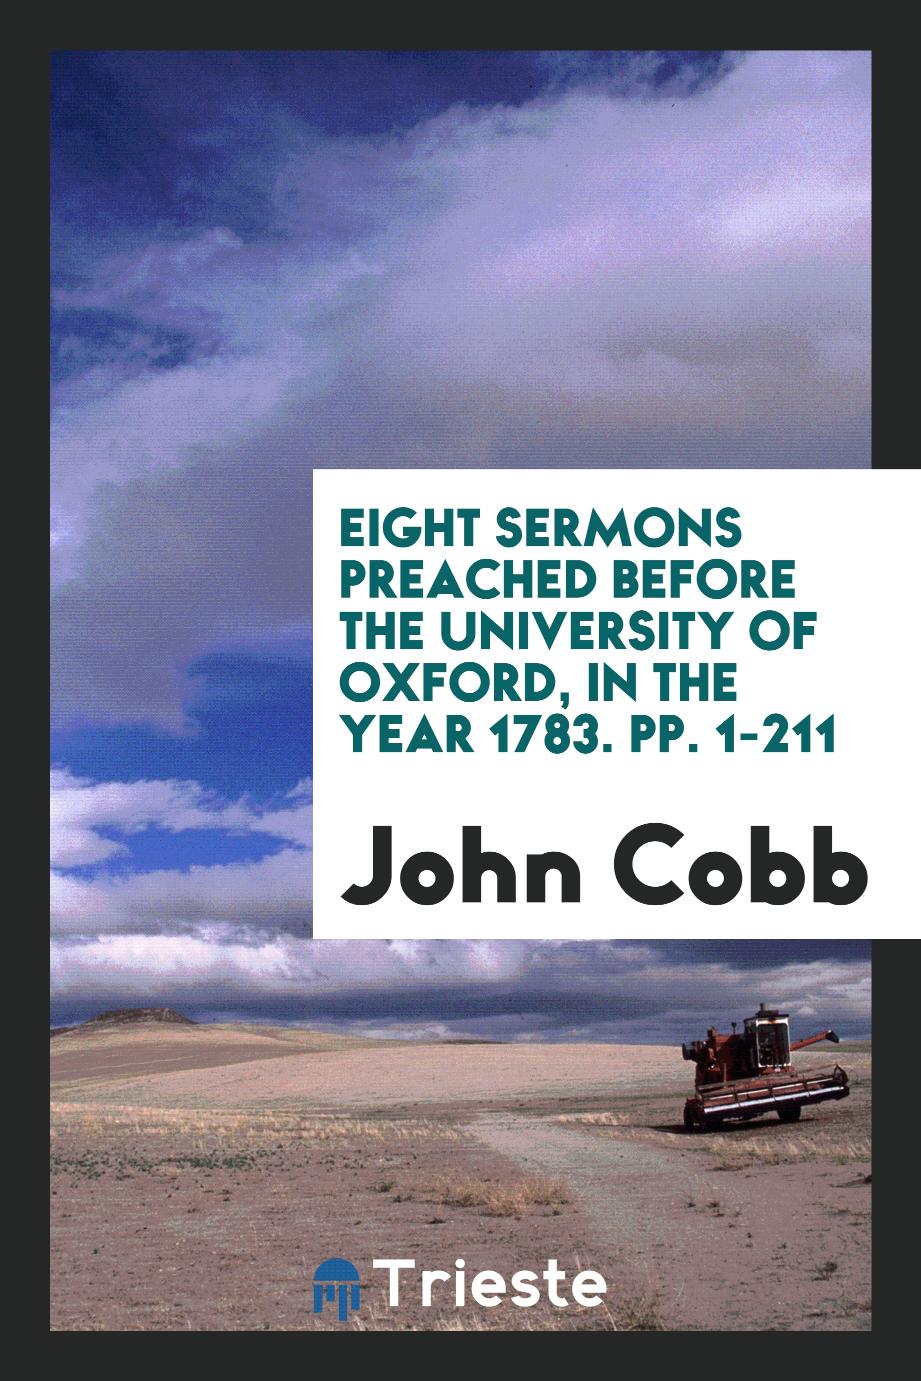 Eight Sermons Preached Before the University of Oxford, in the Year 1783. pp. 1-211